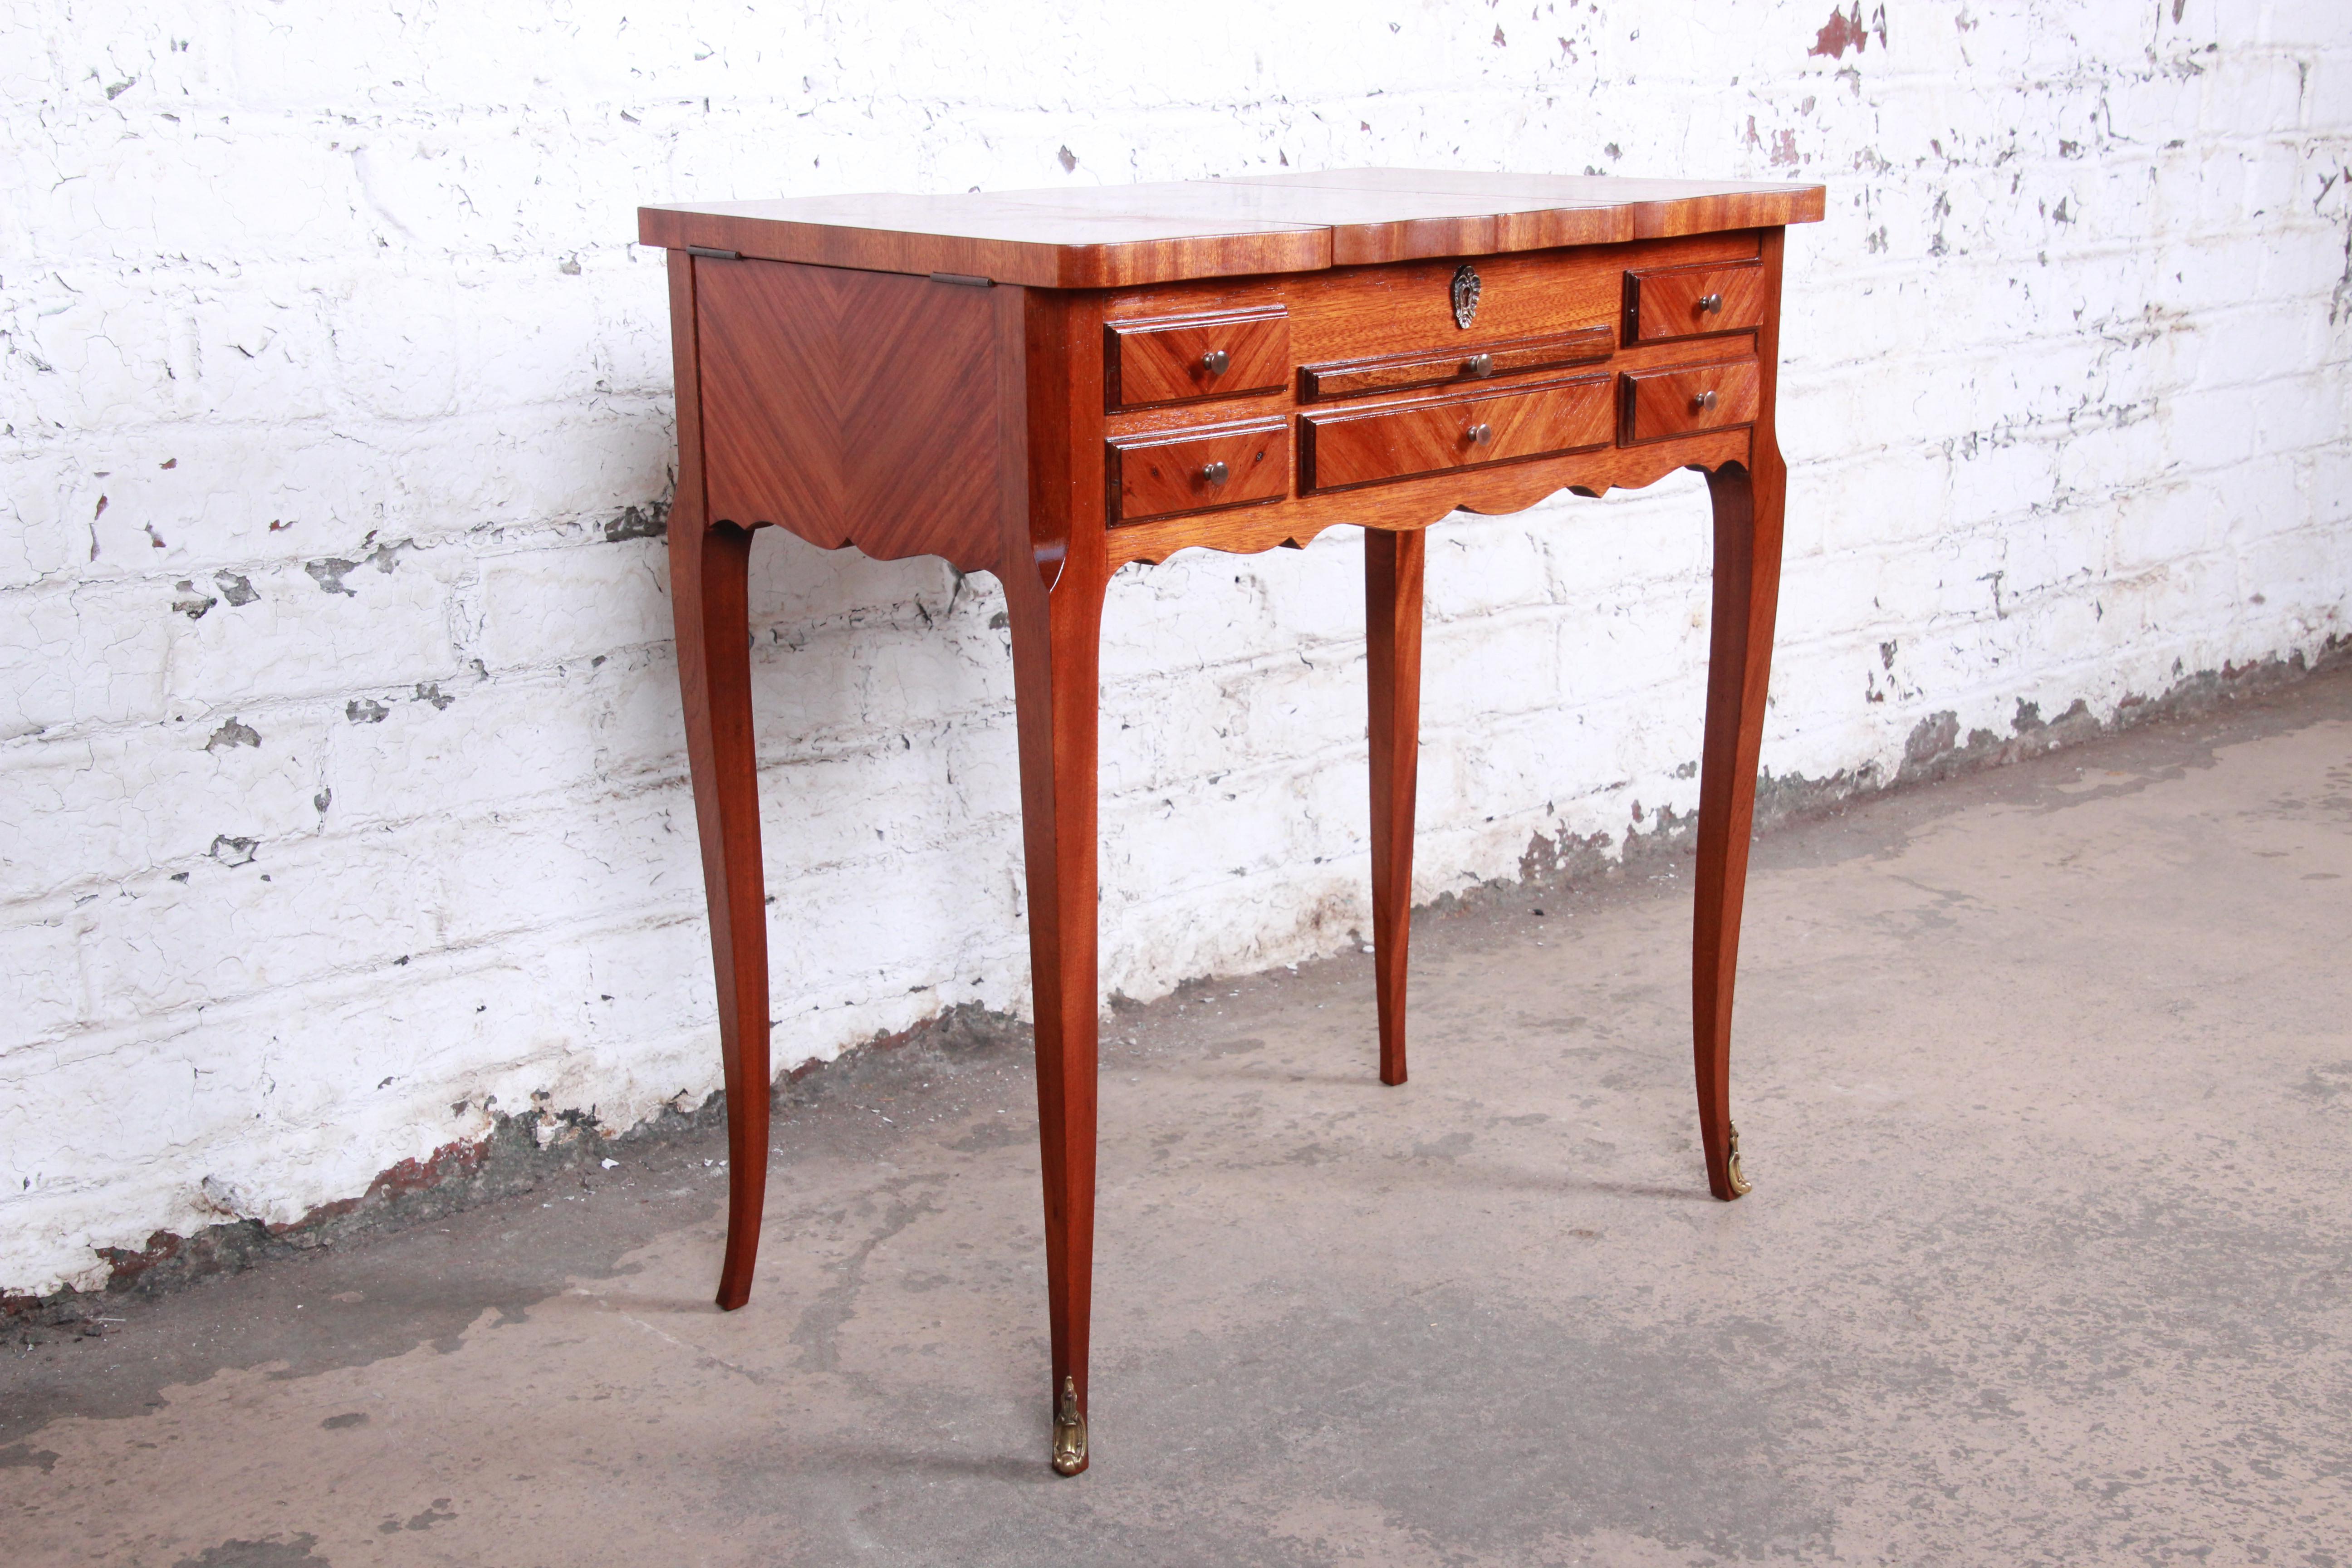 Mid-20th Century Antique French Louis XV Style Mahogany Vanity with Inlaid Floral Marquetry